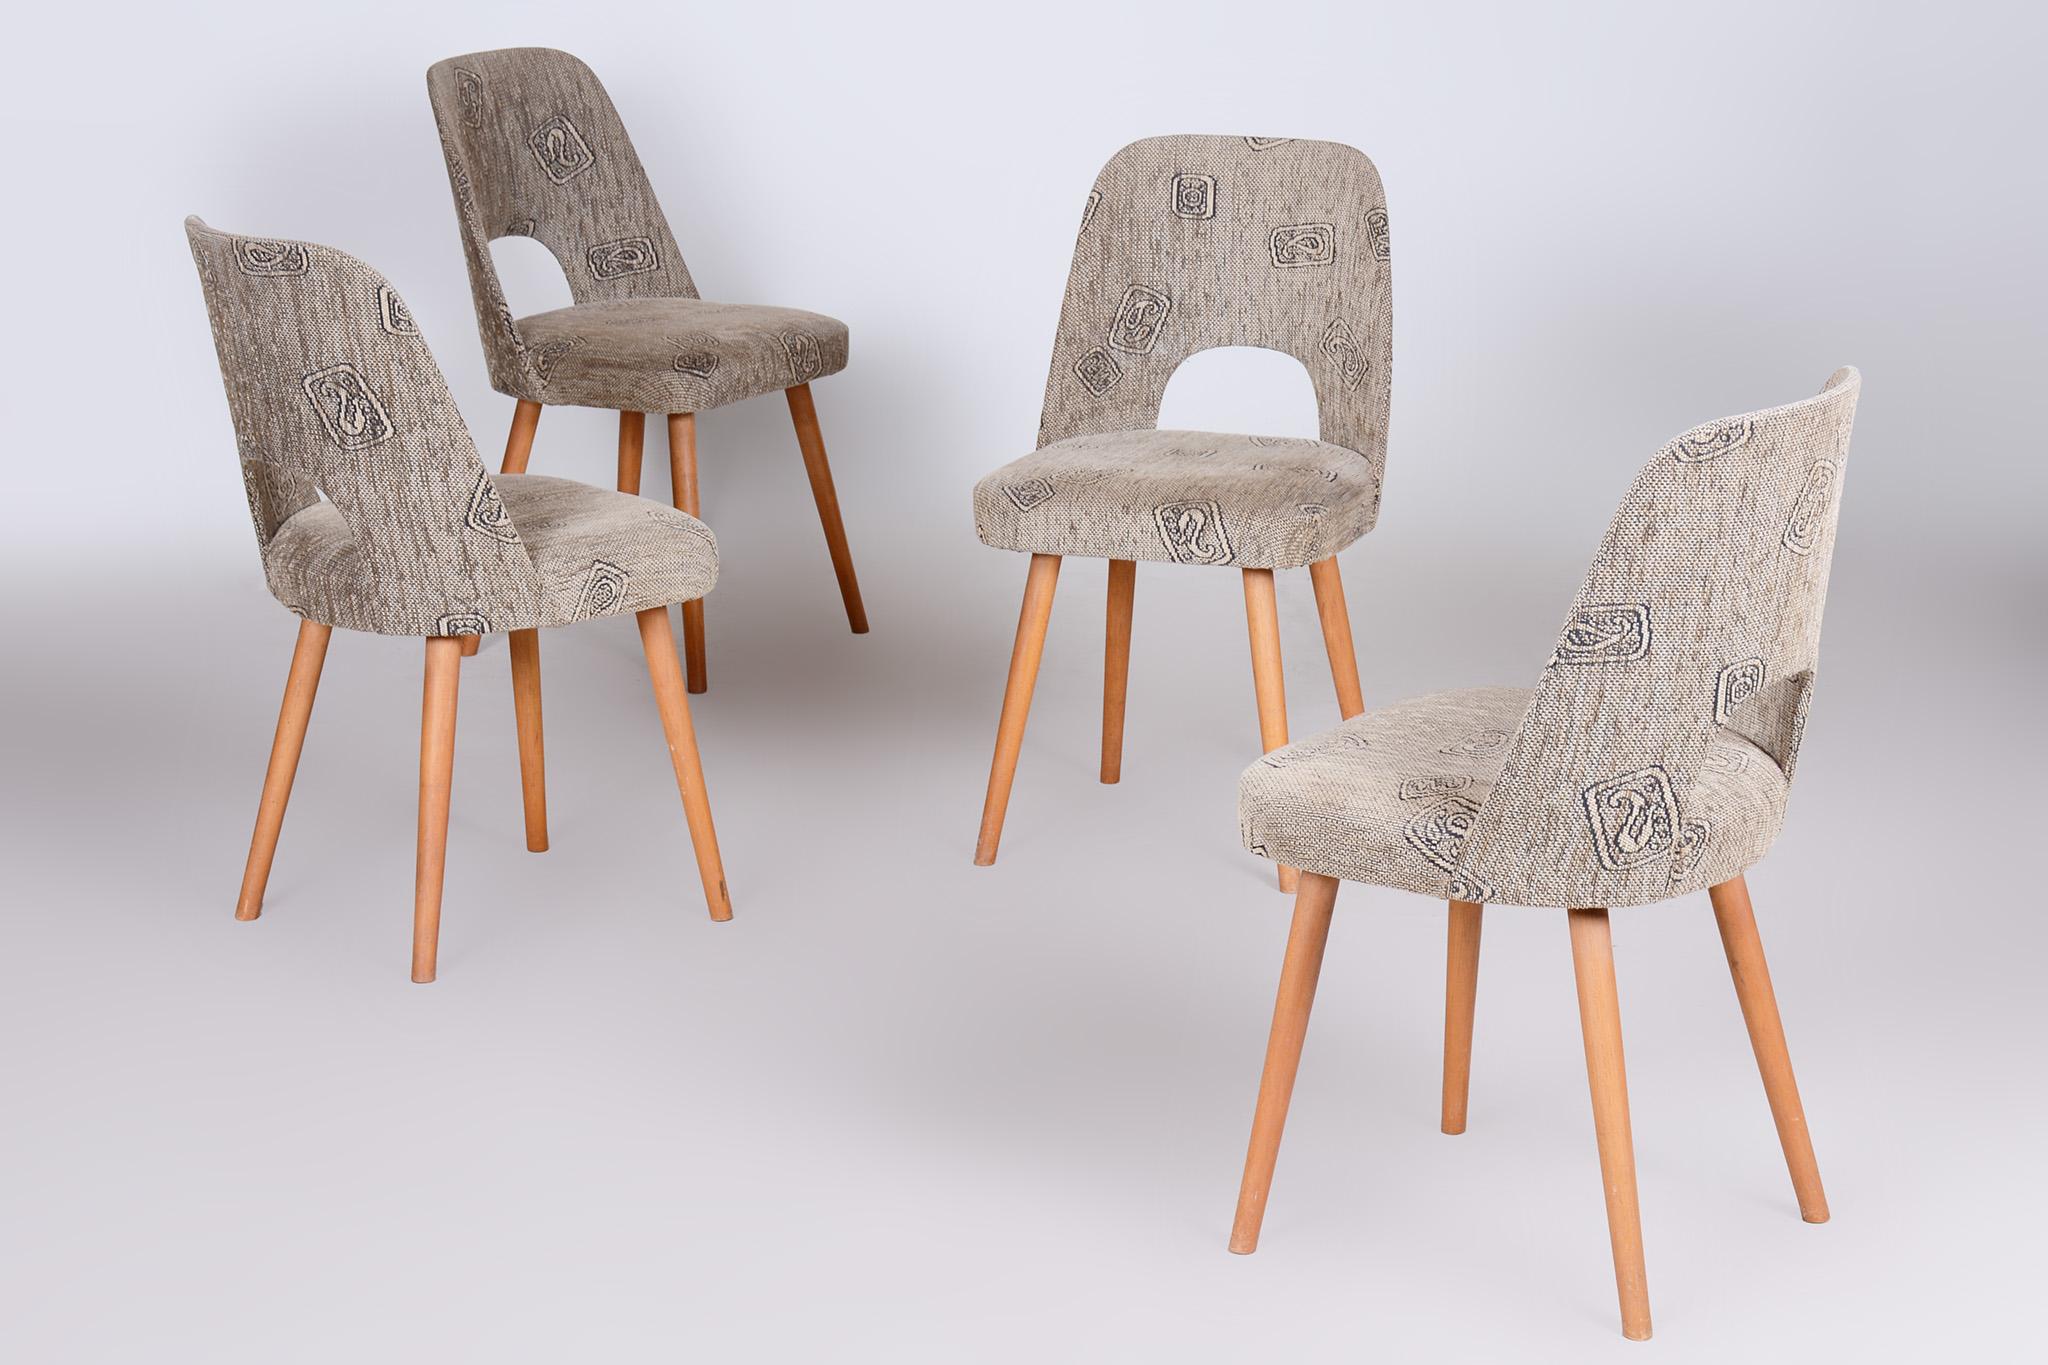 Czech Grey and Brown Ash Chairs by Oswald Haerdtl, 4 Pcs, New Upholstery, 1950s For Sale 3